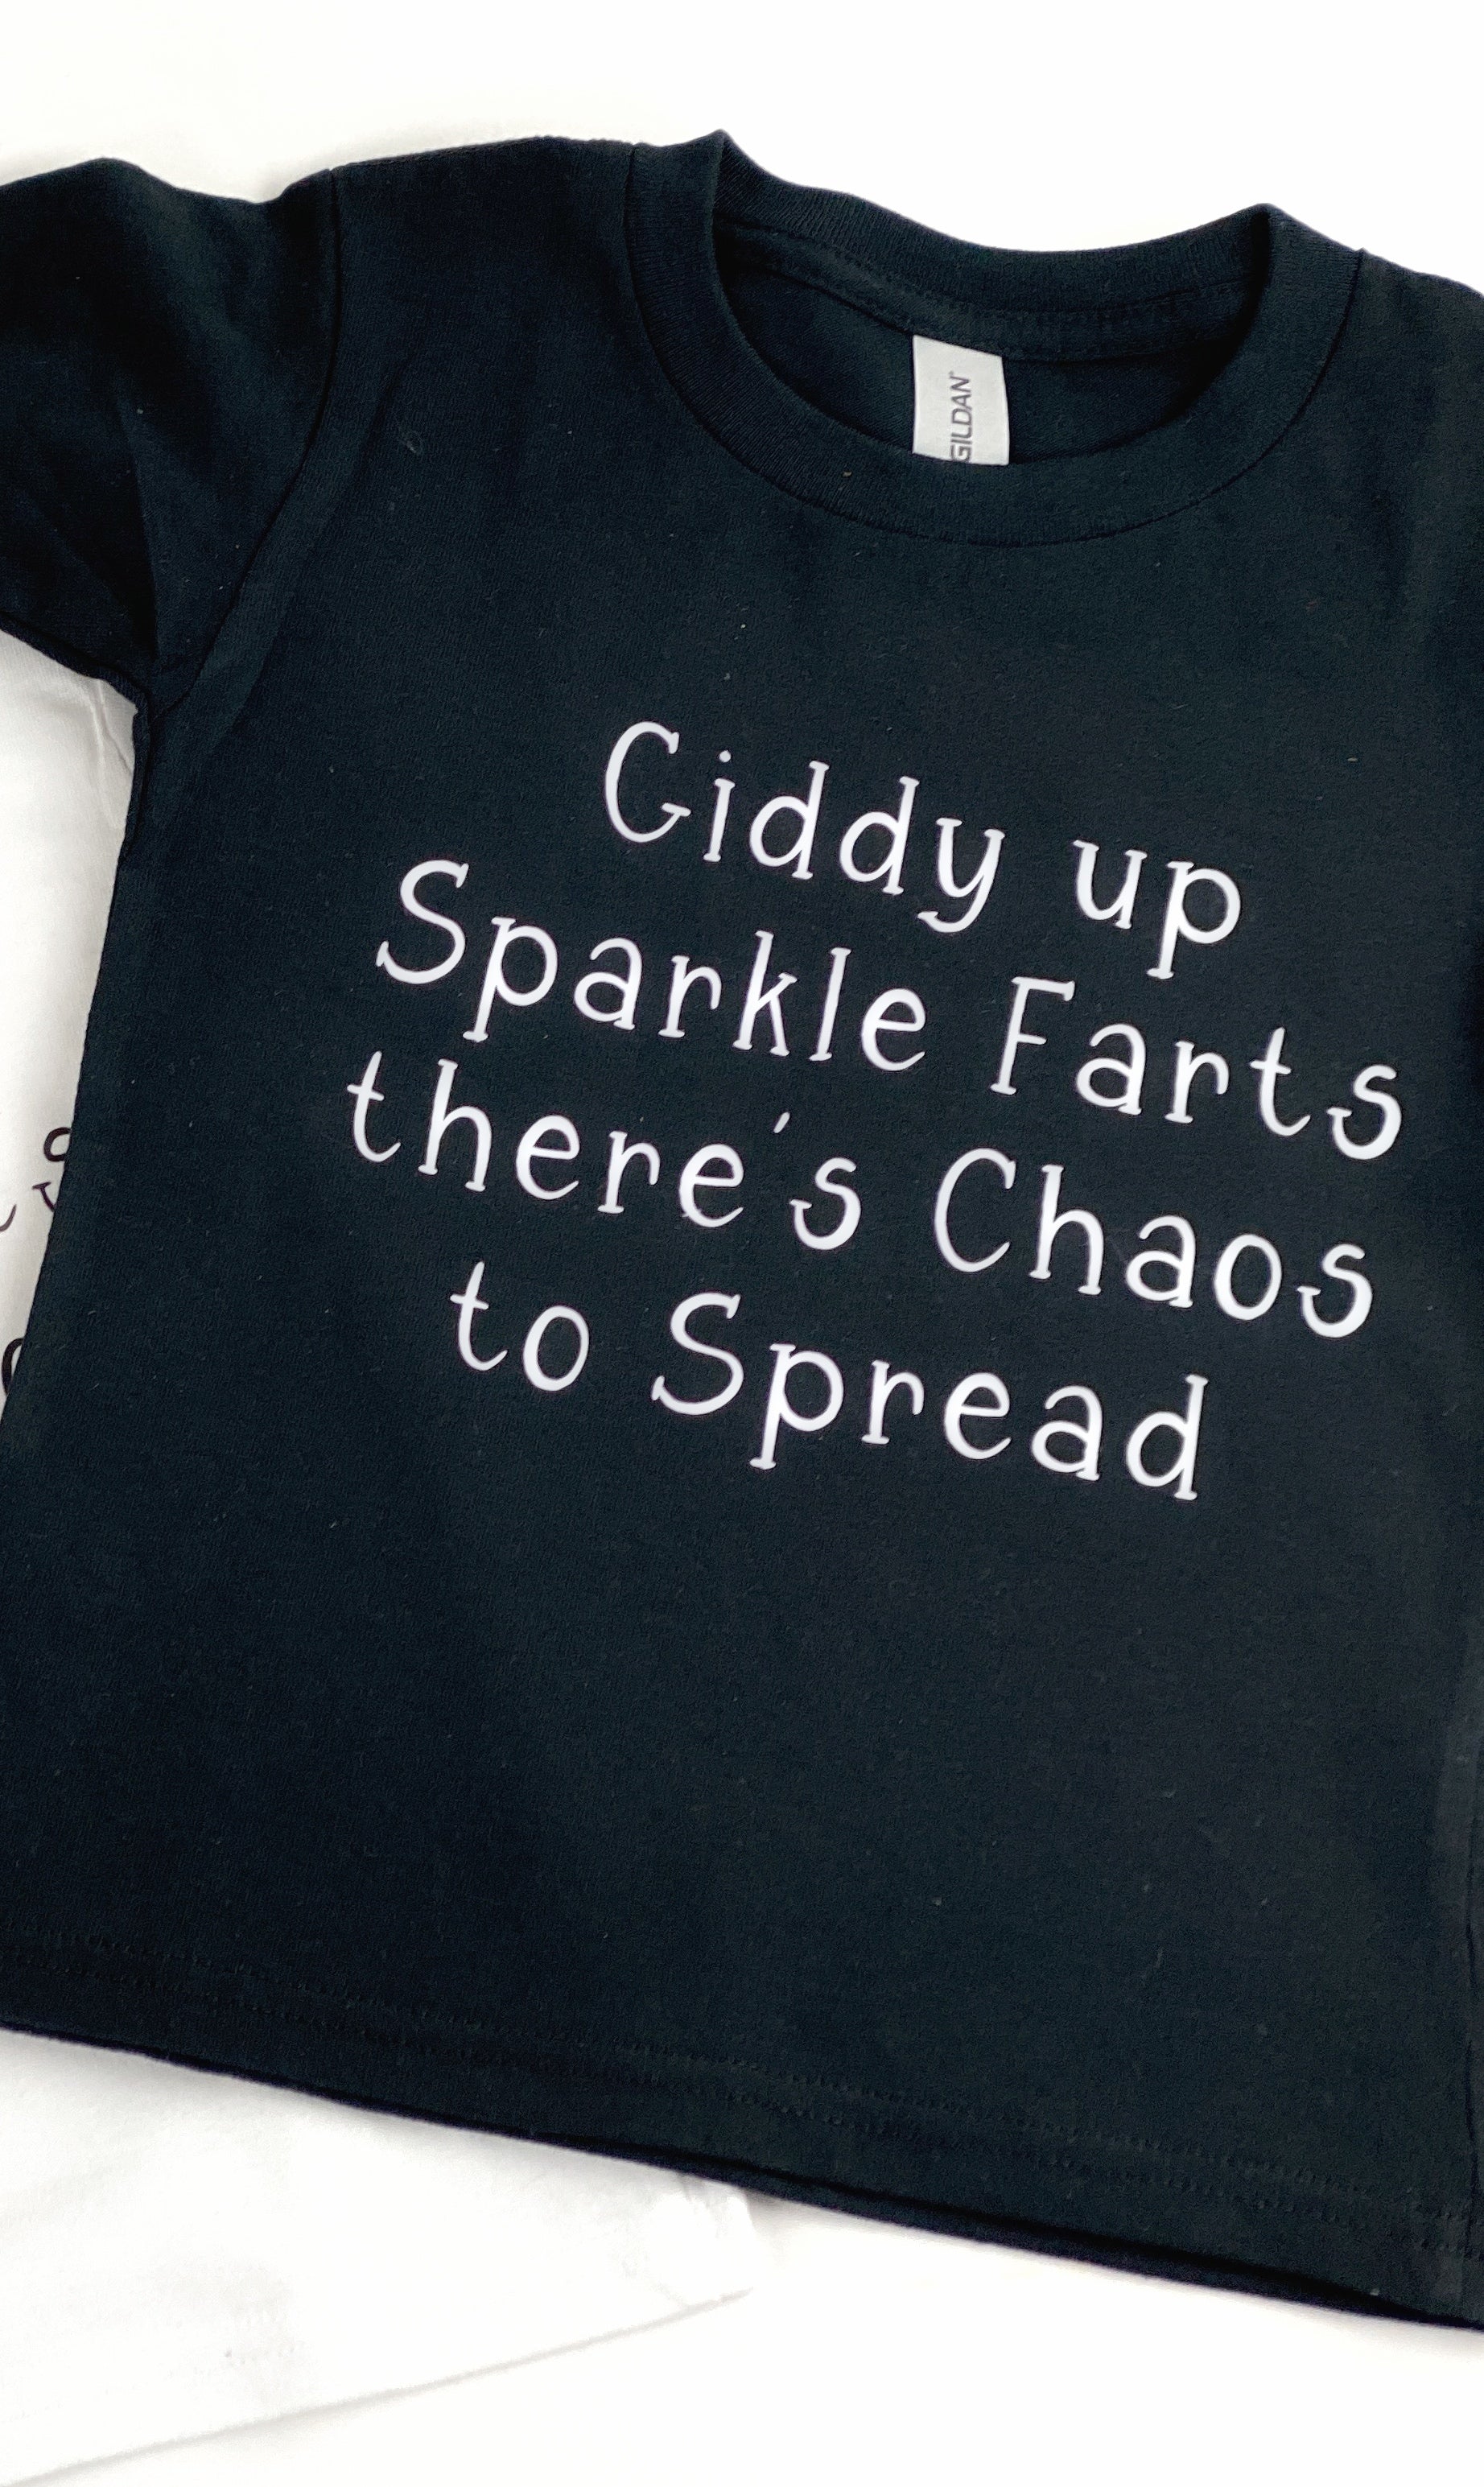 Giddy Up Sparkle Farts There's Chaos to Spread T-Shirt